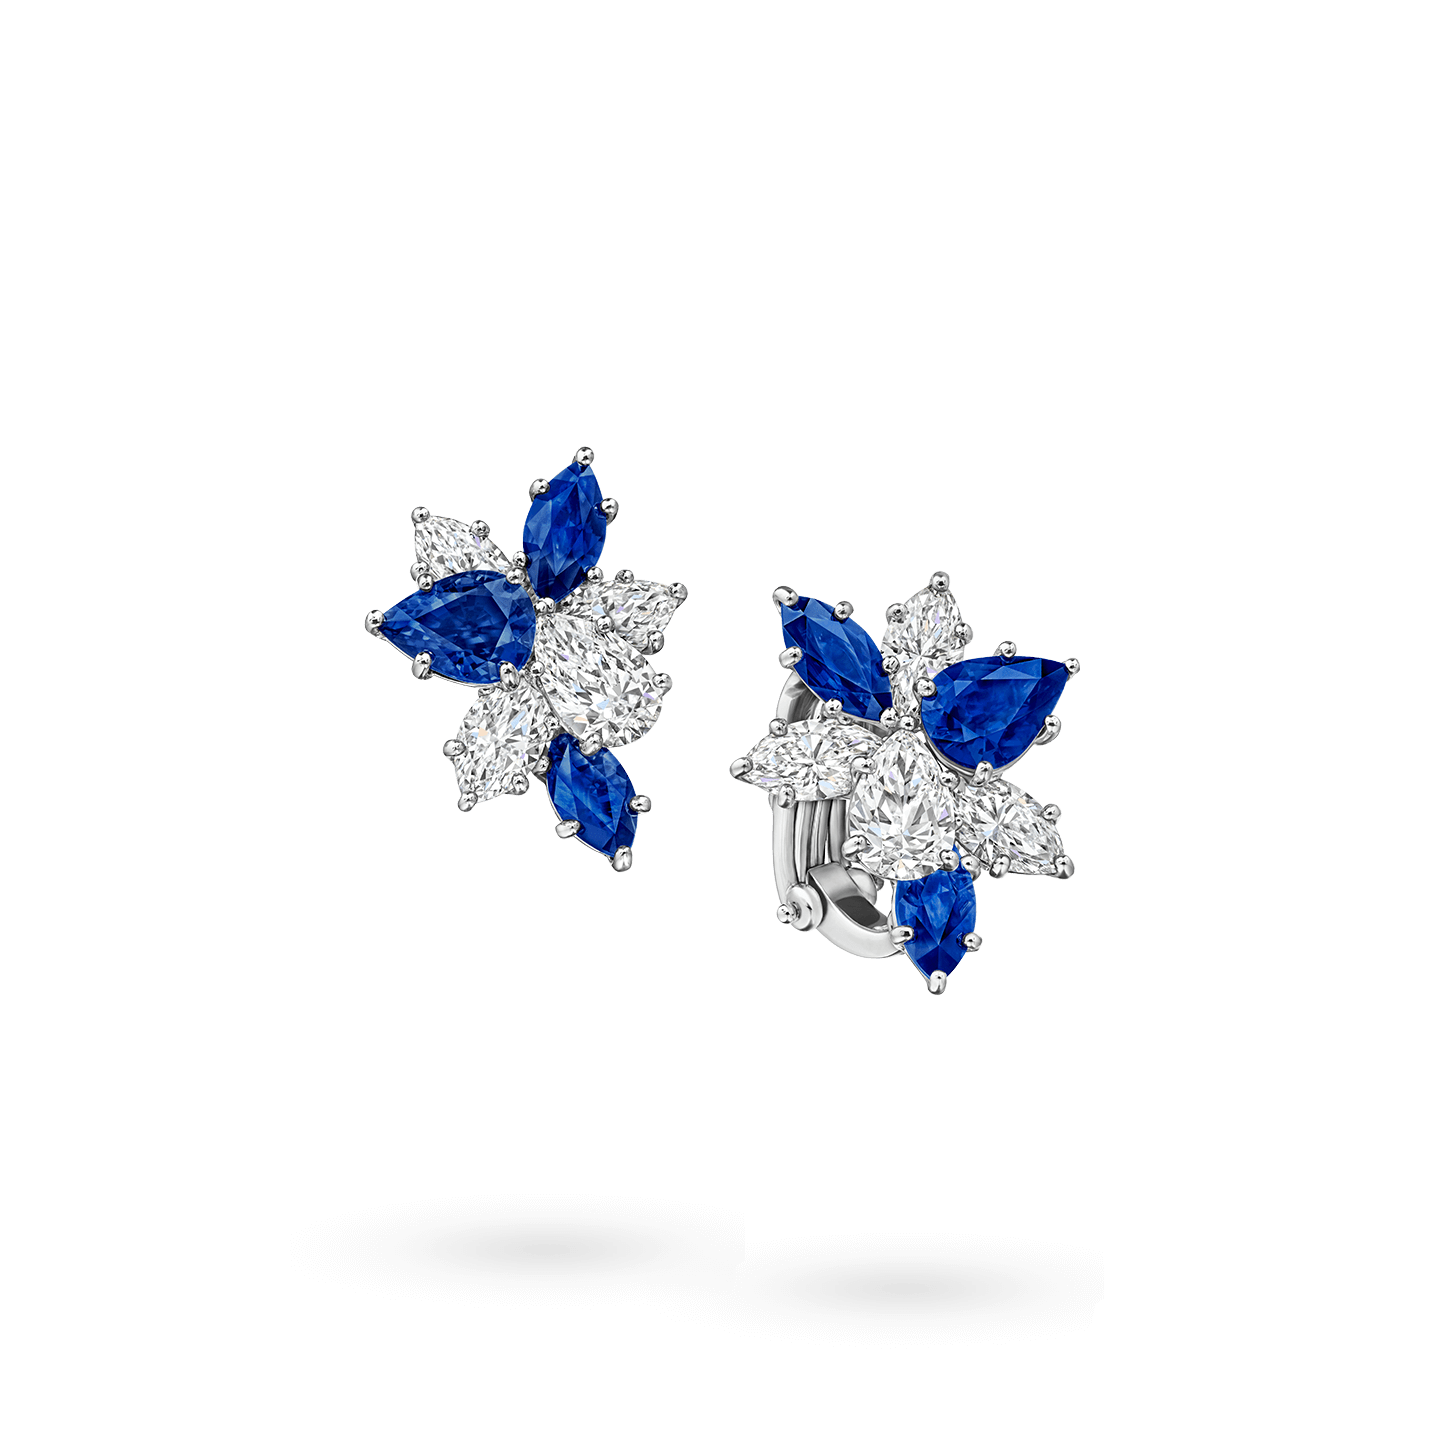 Pair of sapphire and diamond earrings  海瑞溫斯頓藍寶石配鑽石耳環一對  Magnificent  Jewels and Noble Jewels  2022  Sothebys